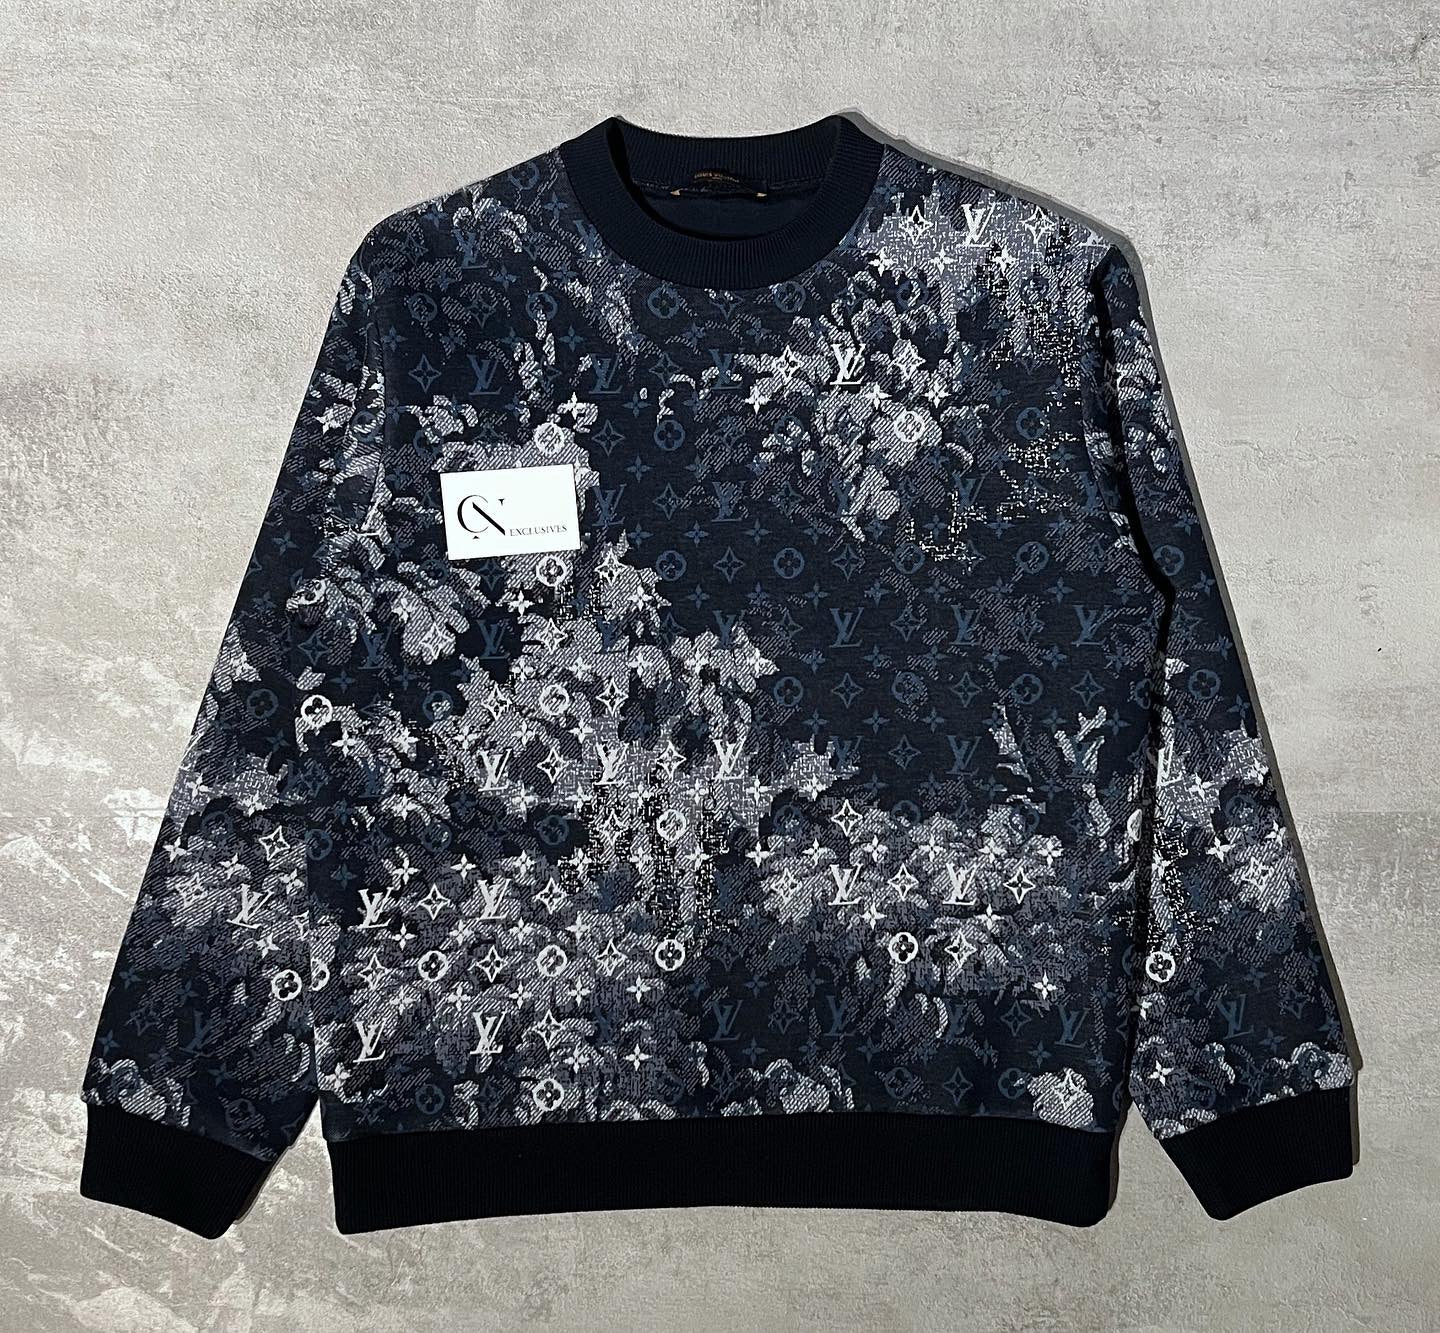 Products By Louis Vuitton: Tapestry Monogram Sweatshirt